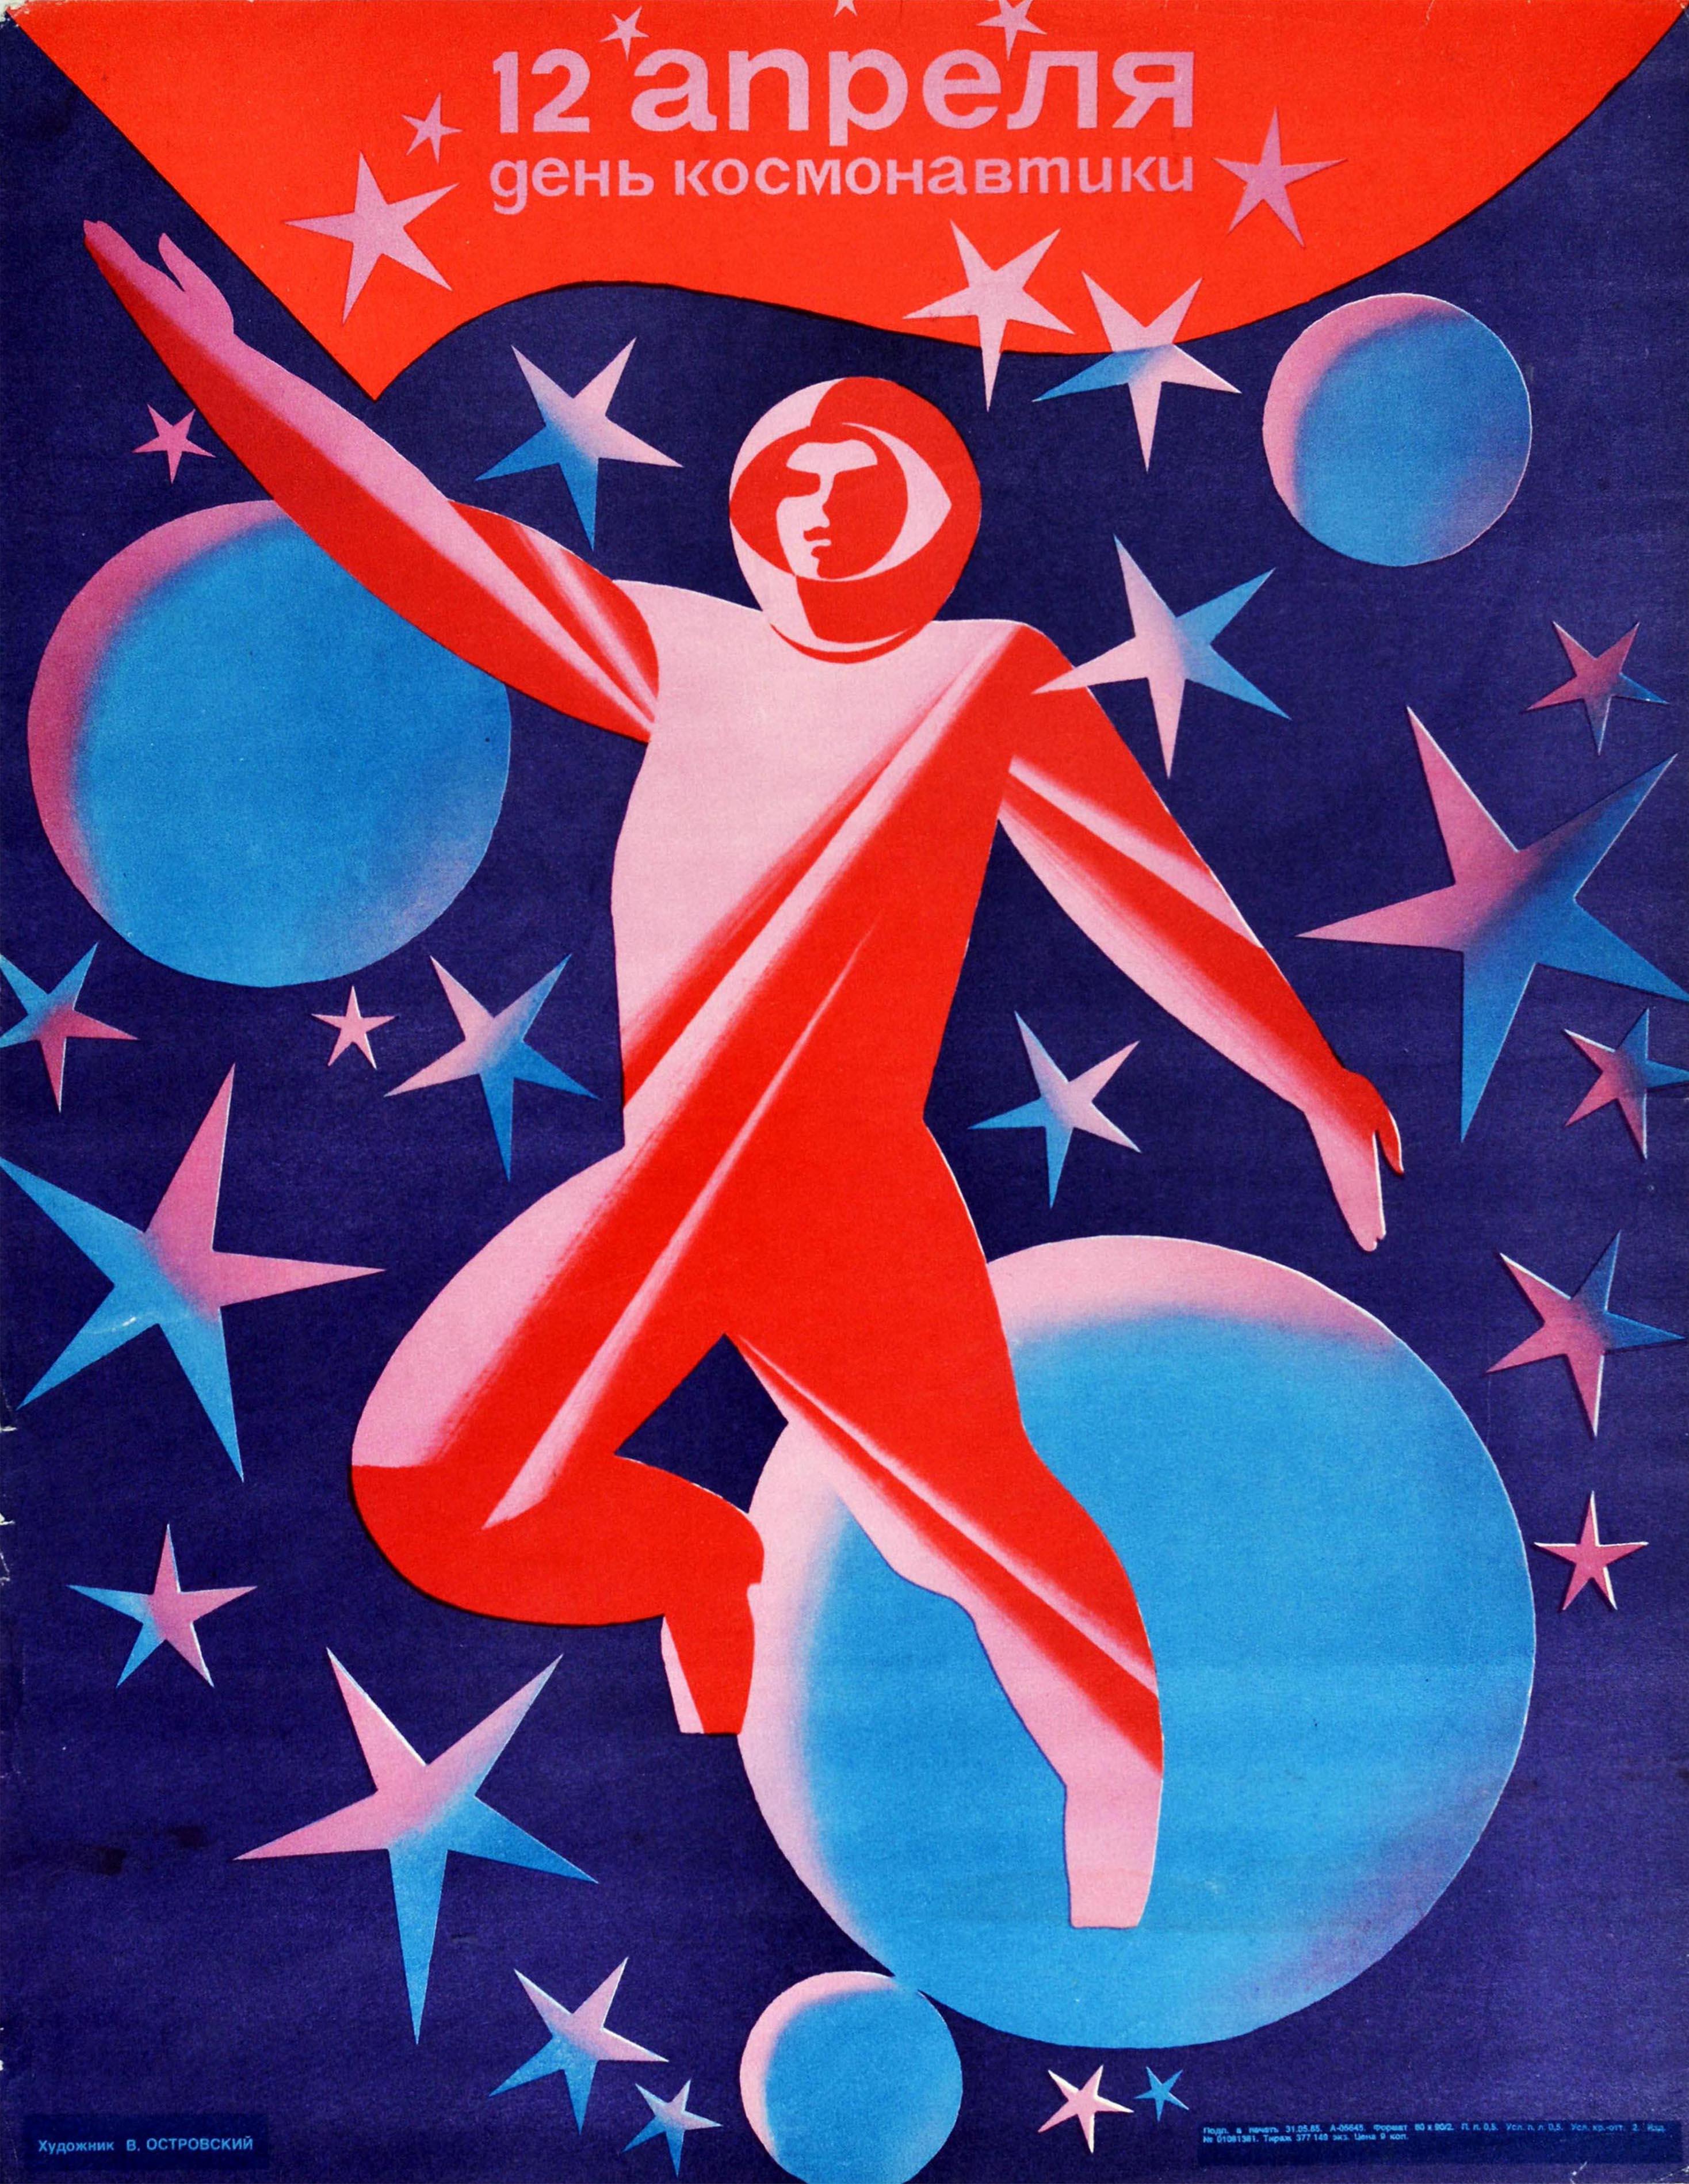 Original vintage Soviet advertising poster promoting Cosmonautics Day on 12 April - the anniversary of the first manned space flight on 12 April 1961 by the pilot and cosmonaut Yuri Gagarin (Yuri Alekseyevich Gagarin; 1934-1968), now commemorated by